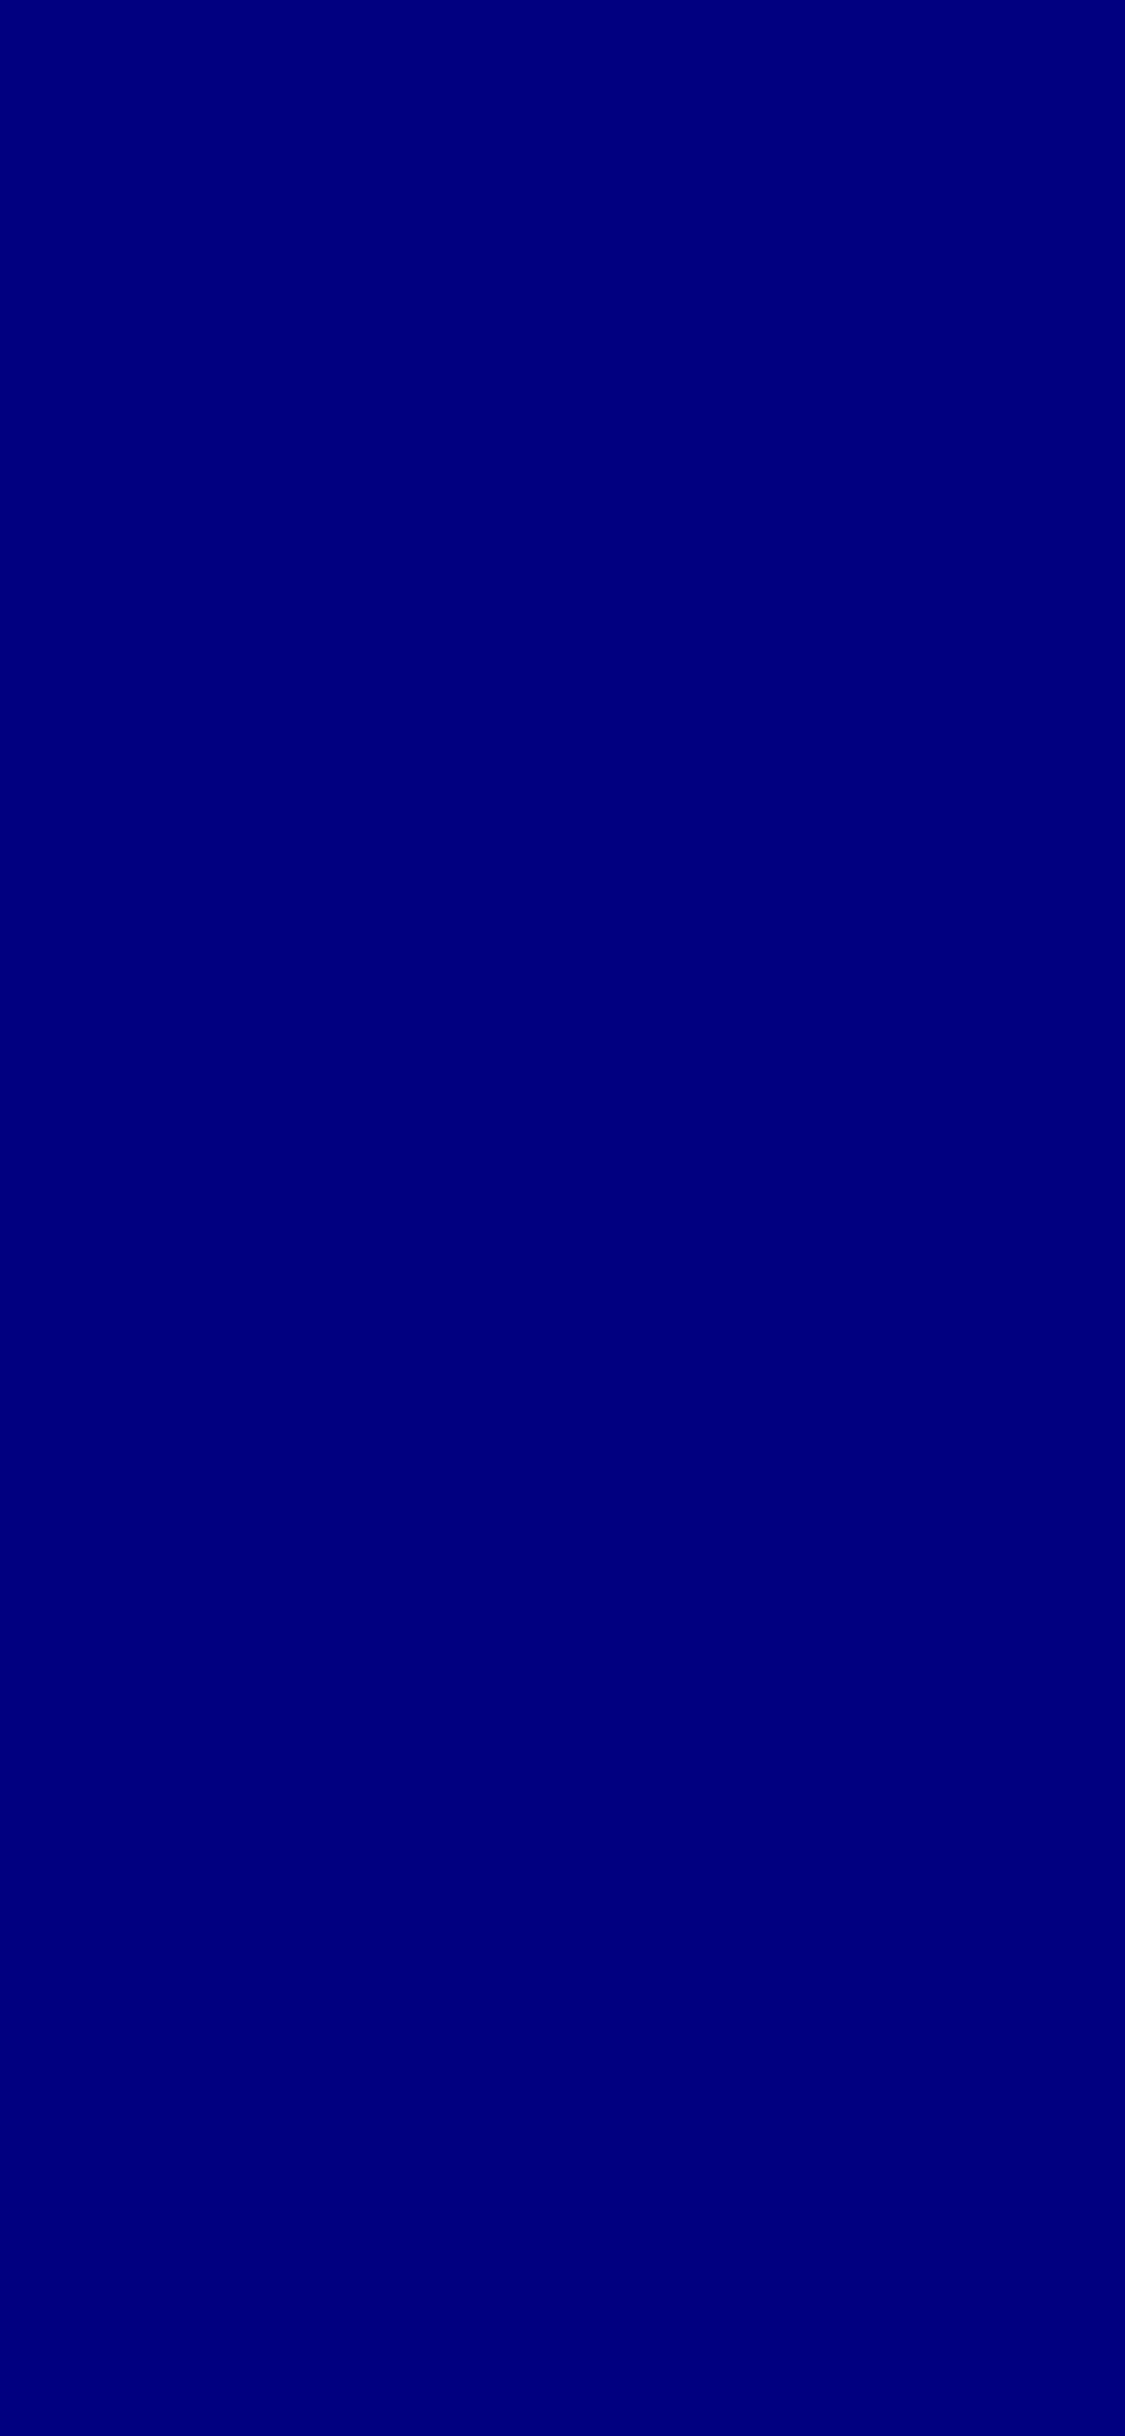 1125x2436 Navy Blue Solid Color Background